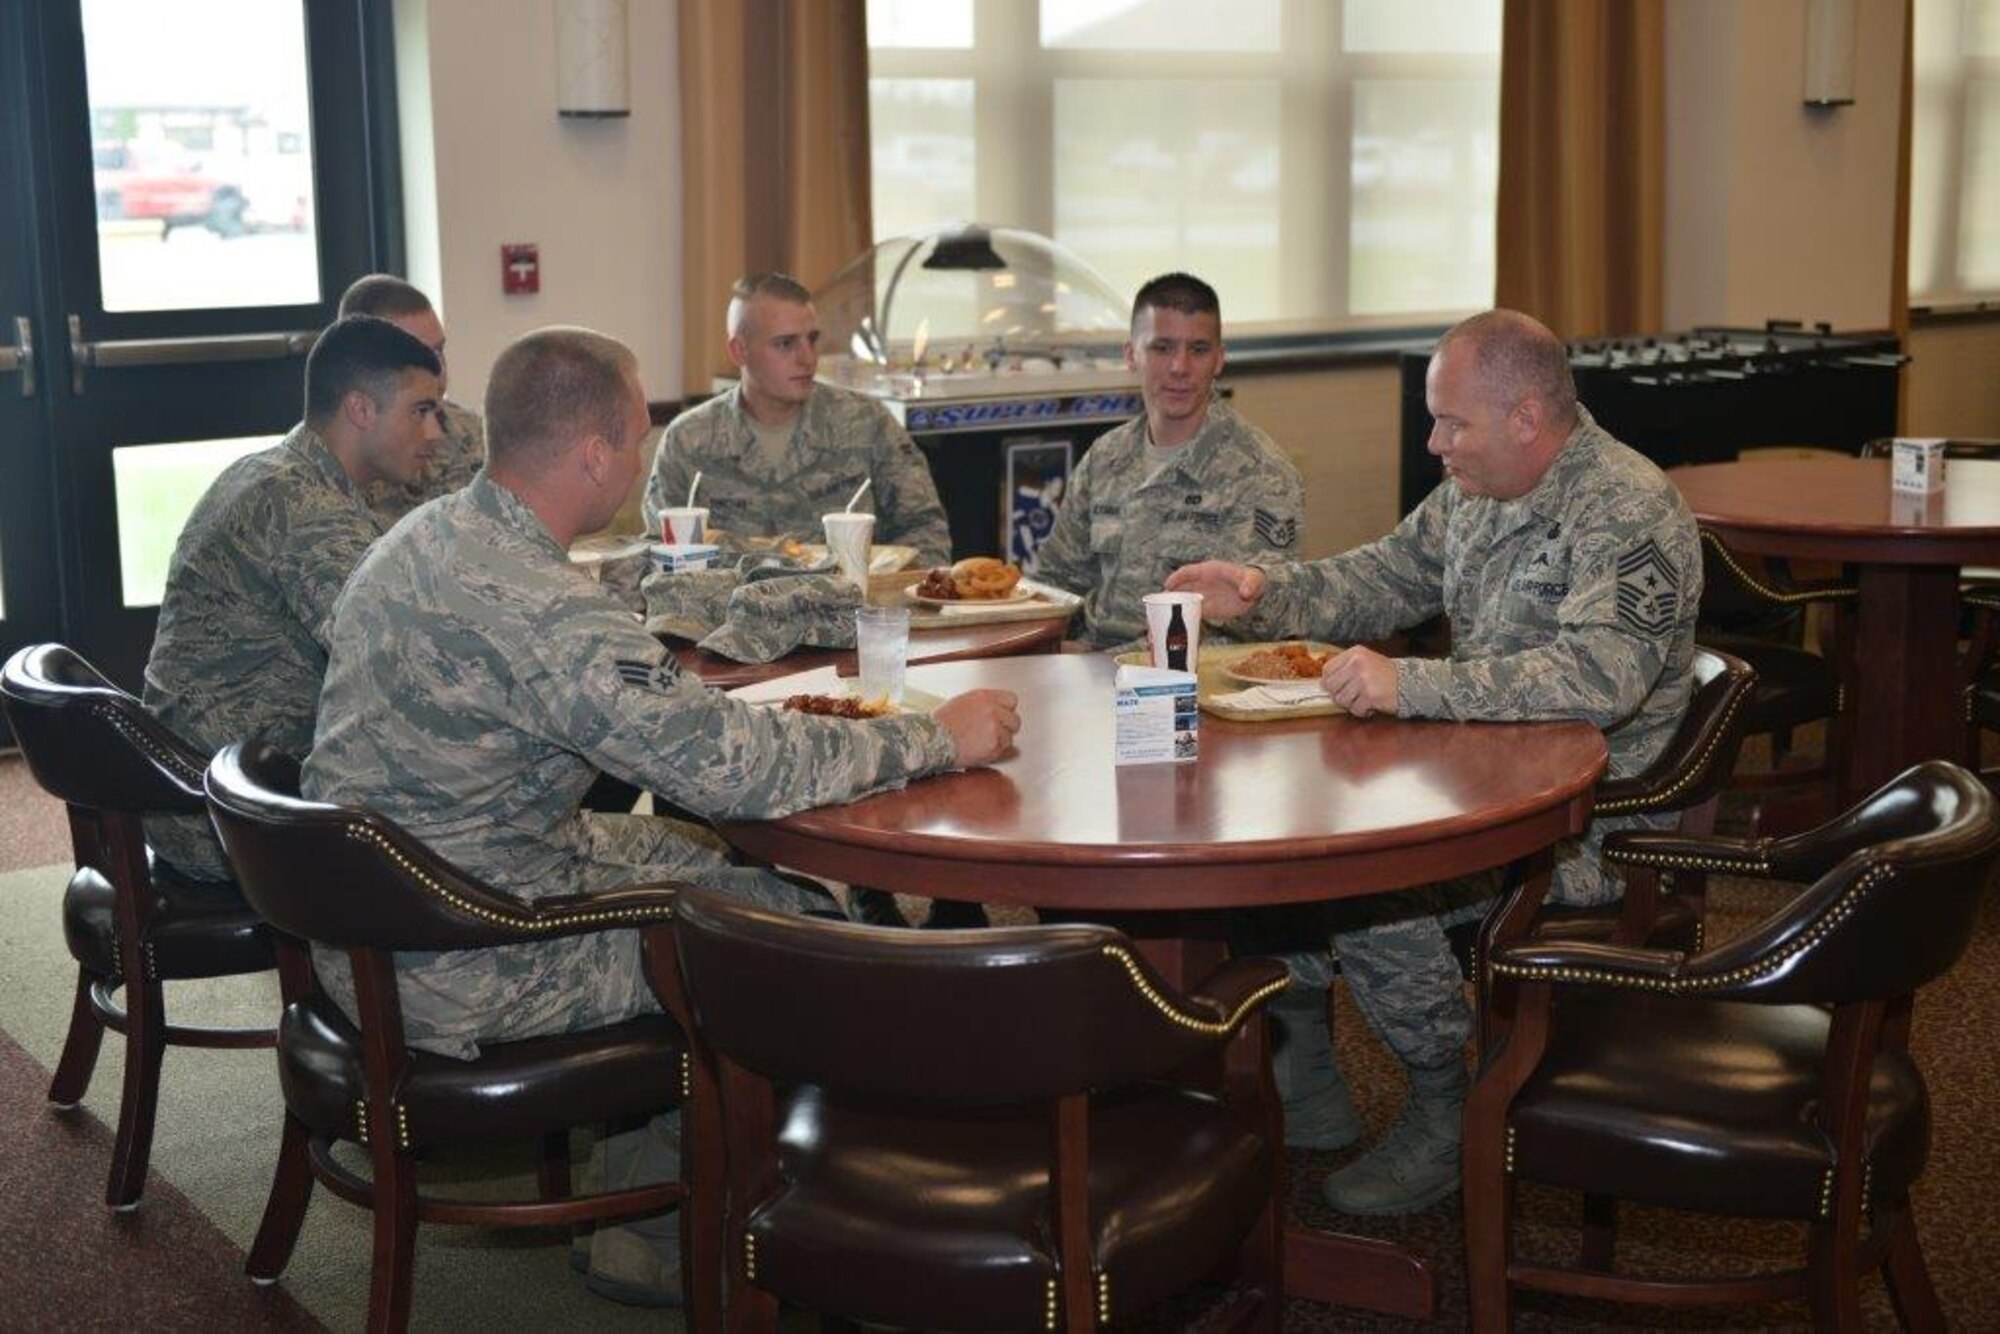 Command Chief Master Sergeant of the Air National Guard, James W. Hotaling (right) has lunch at Niagara Falls Air Reserve Station on June 14, 2015 with Senior Airman John Guiher, Airmen 1st Class Michael Giordano, Airman 1st Class Jared Hicks, Airman 1st Class Joshua Yurchek, and Staff Sergeant Christopher McKimmie to thank them for saving a man from drowning (U.S. Air National Guard photo by Staff Sgt. Ryan Campbell).